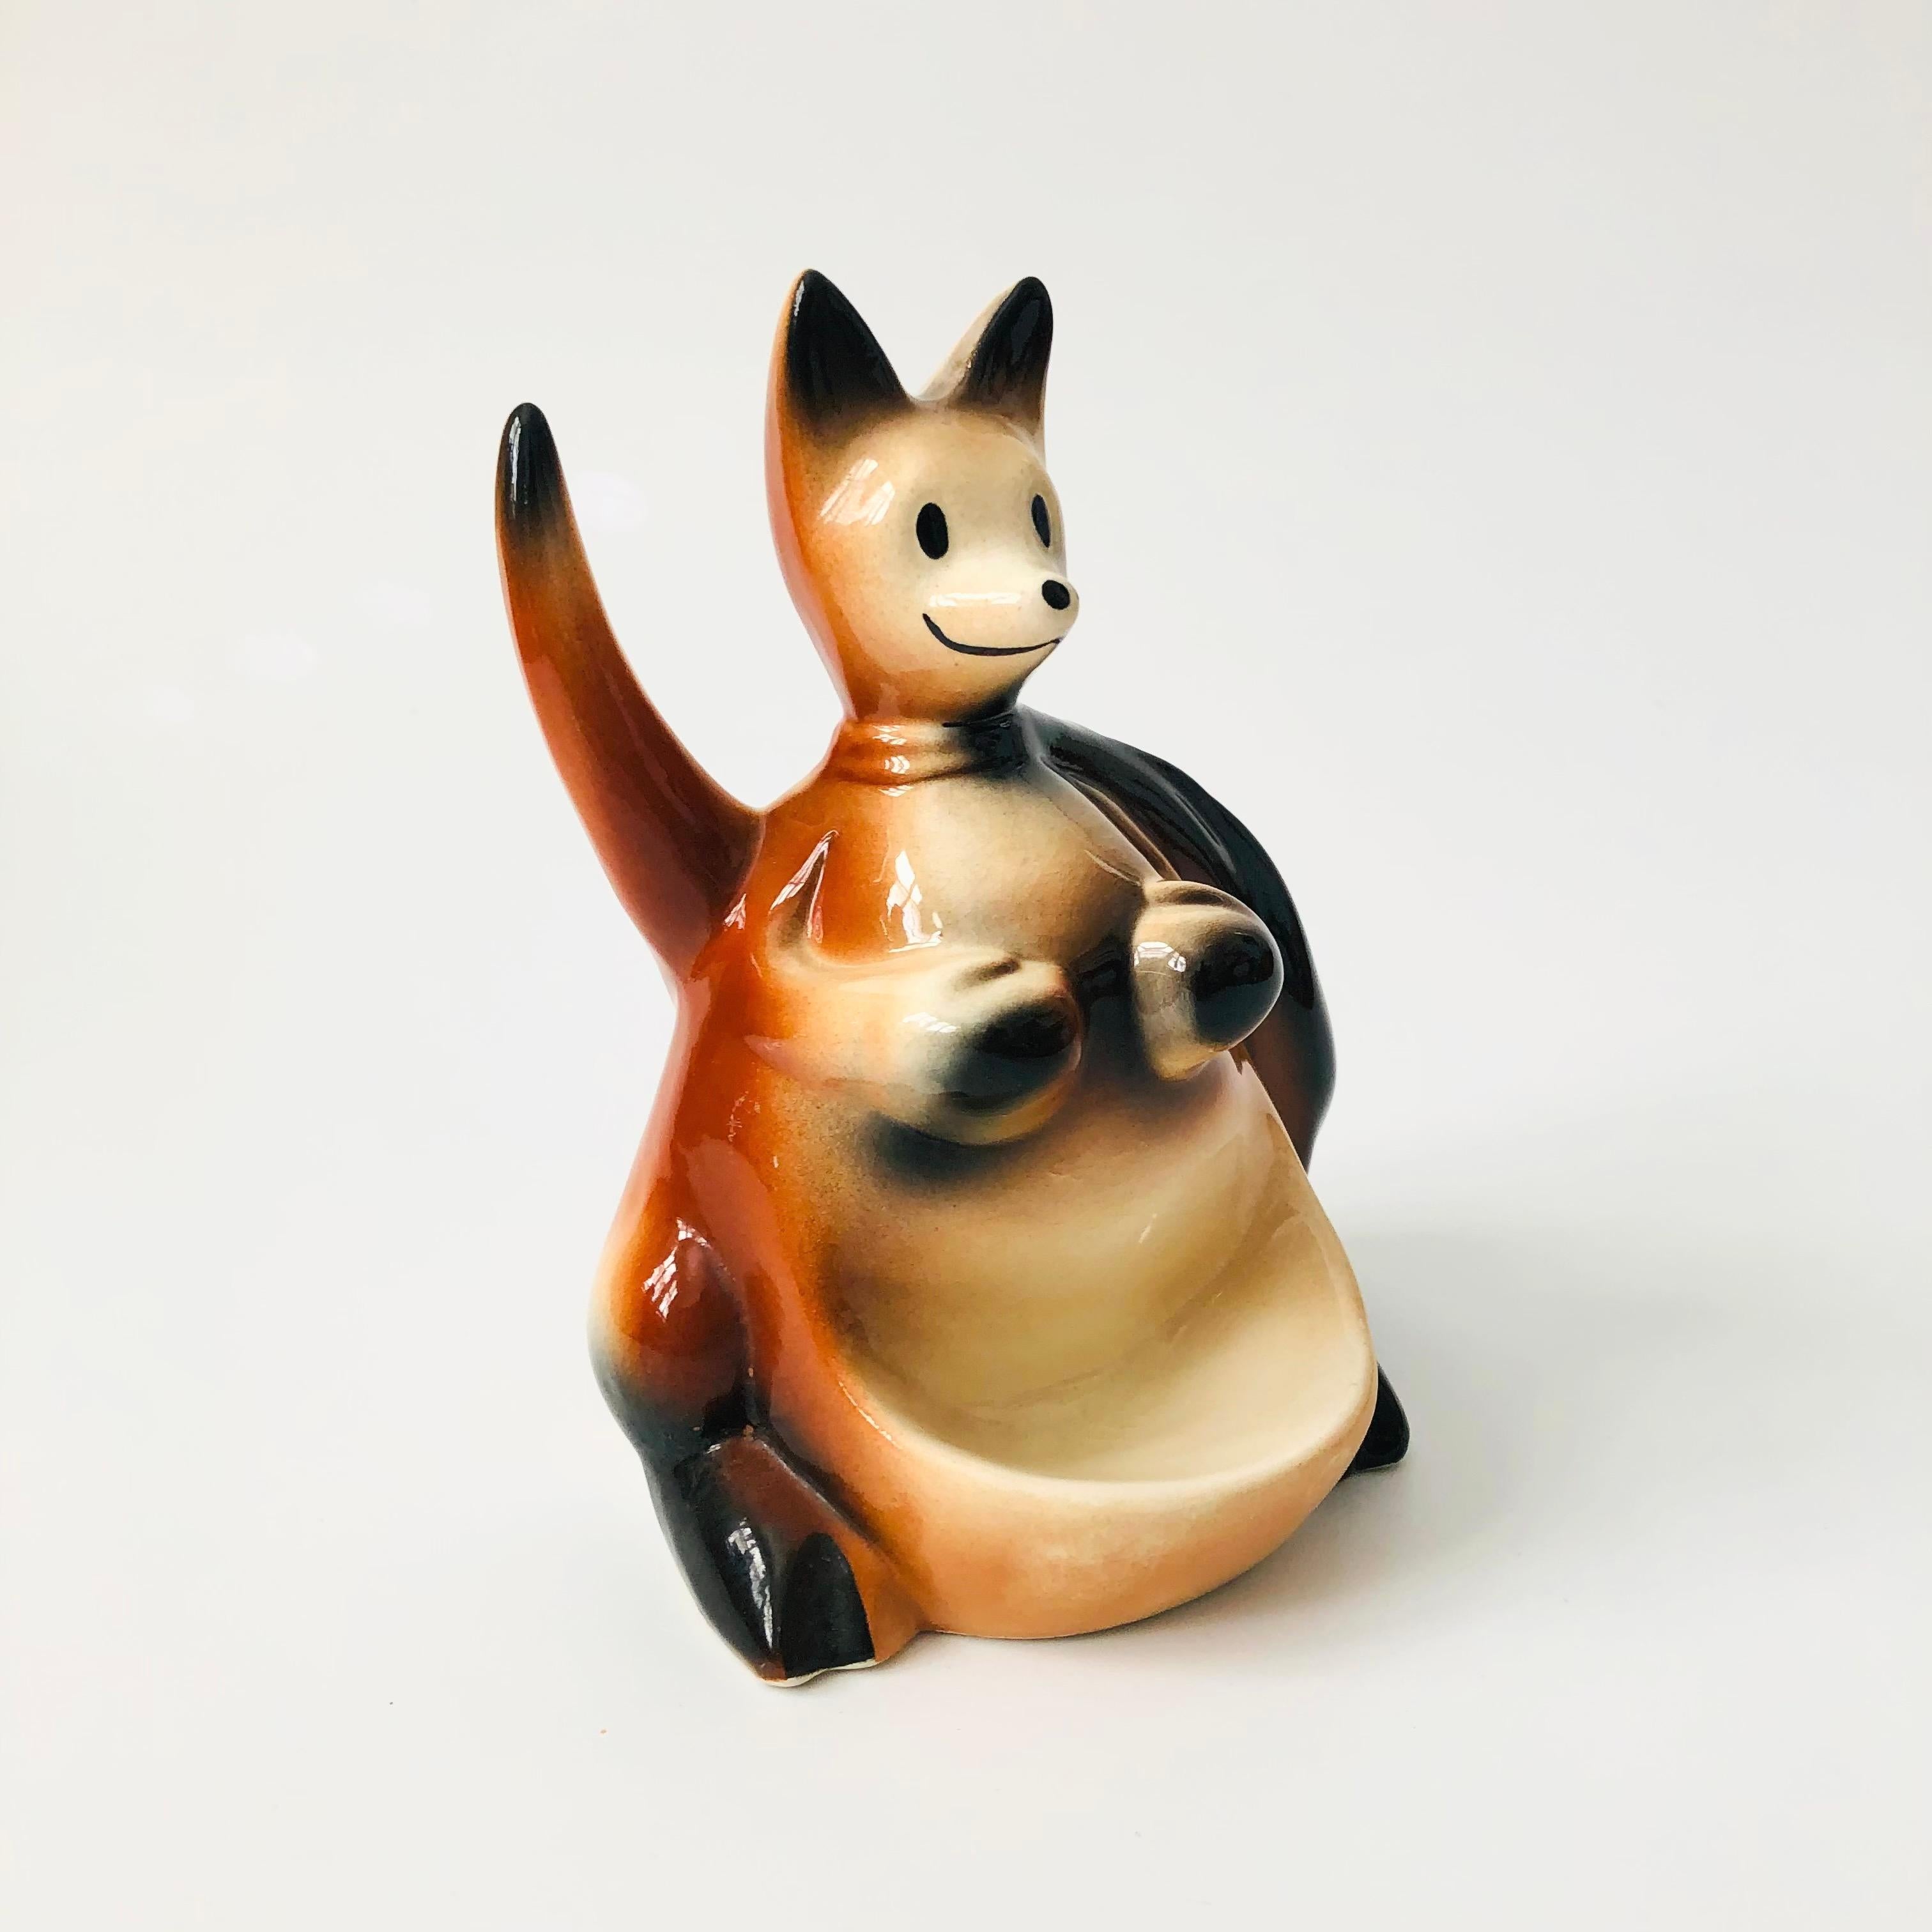 A mid century ceramic organizer/ tray in the shape of a kangaroo. Features a front dish and also a pocket in the back for keeping items. Marked on the back, made in the USA in 1956 by Fine Ent. Inc

